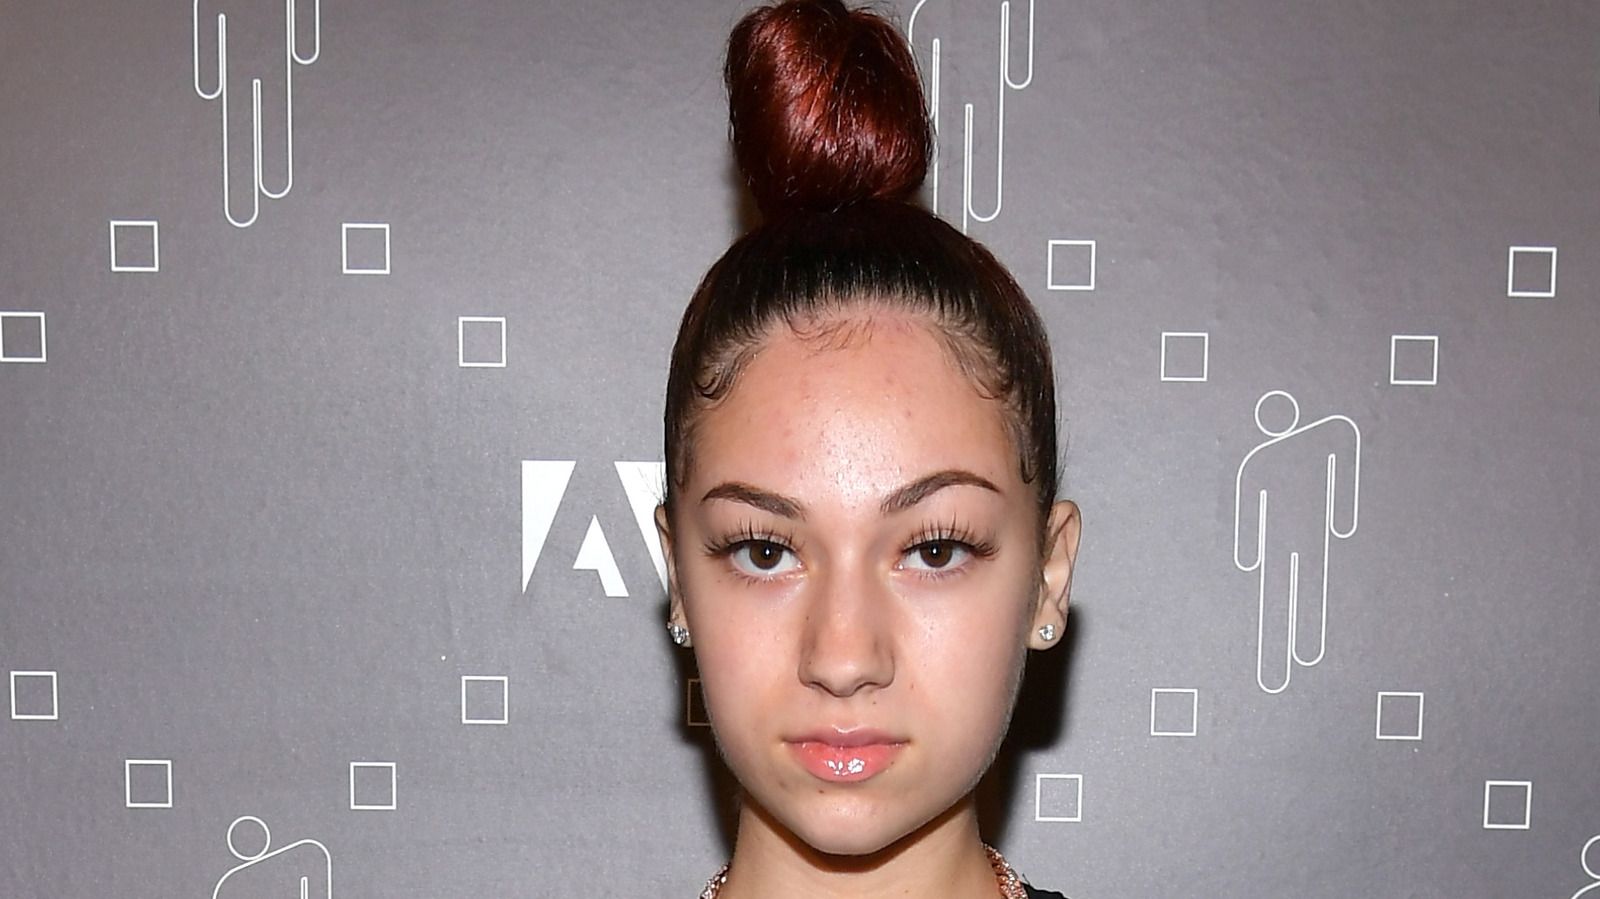 Account only fans bhad bhabie 13 facts